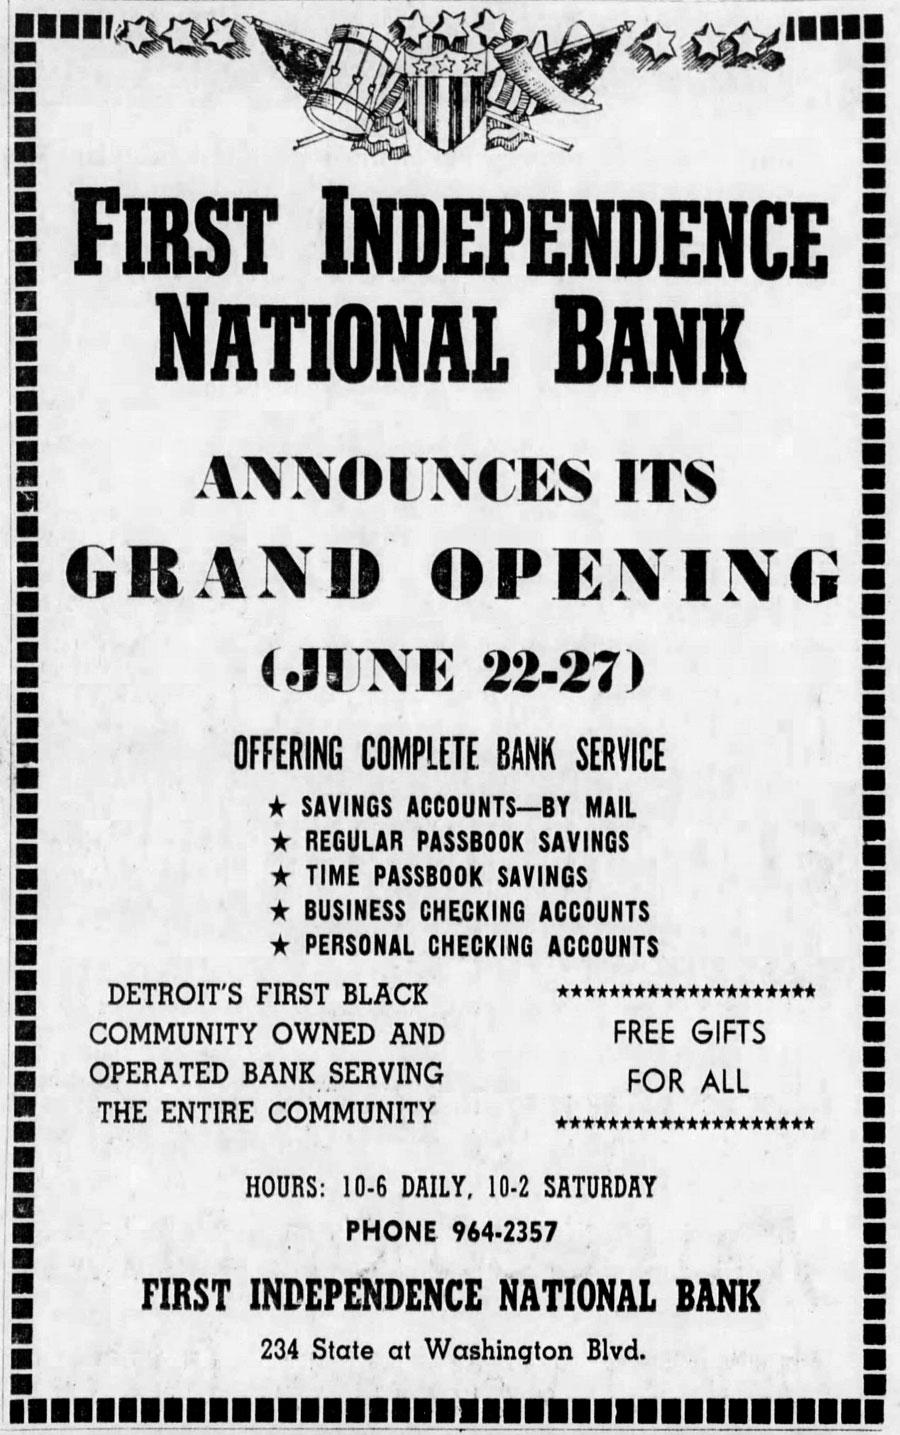 An old black and white flyer announcing the Grand Opening of First Independence National Bank, June 22-27. Detroit’s first Black community owned and operated bank serving the entire community. The flyer also states - Offering complete bank service: Savings accounts by mail; Regular passbook savings; Time passbook savings; Business checking accounts; Personal checking accounts. Free gifts for all. At the bottom of the flyer is the bank’s old hours of operation (10-6 daily; 10-2 Saturday); phone number (964-2357); and address (234 State at Washington Blvd).